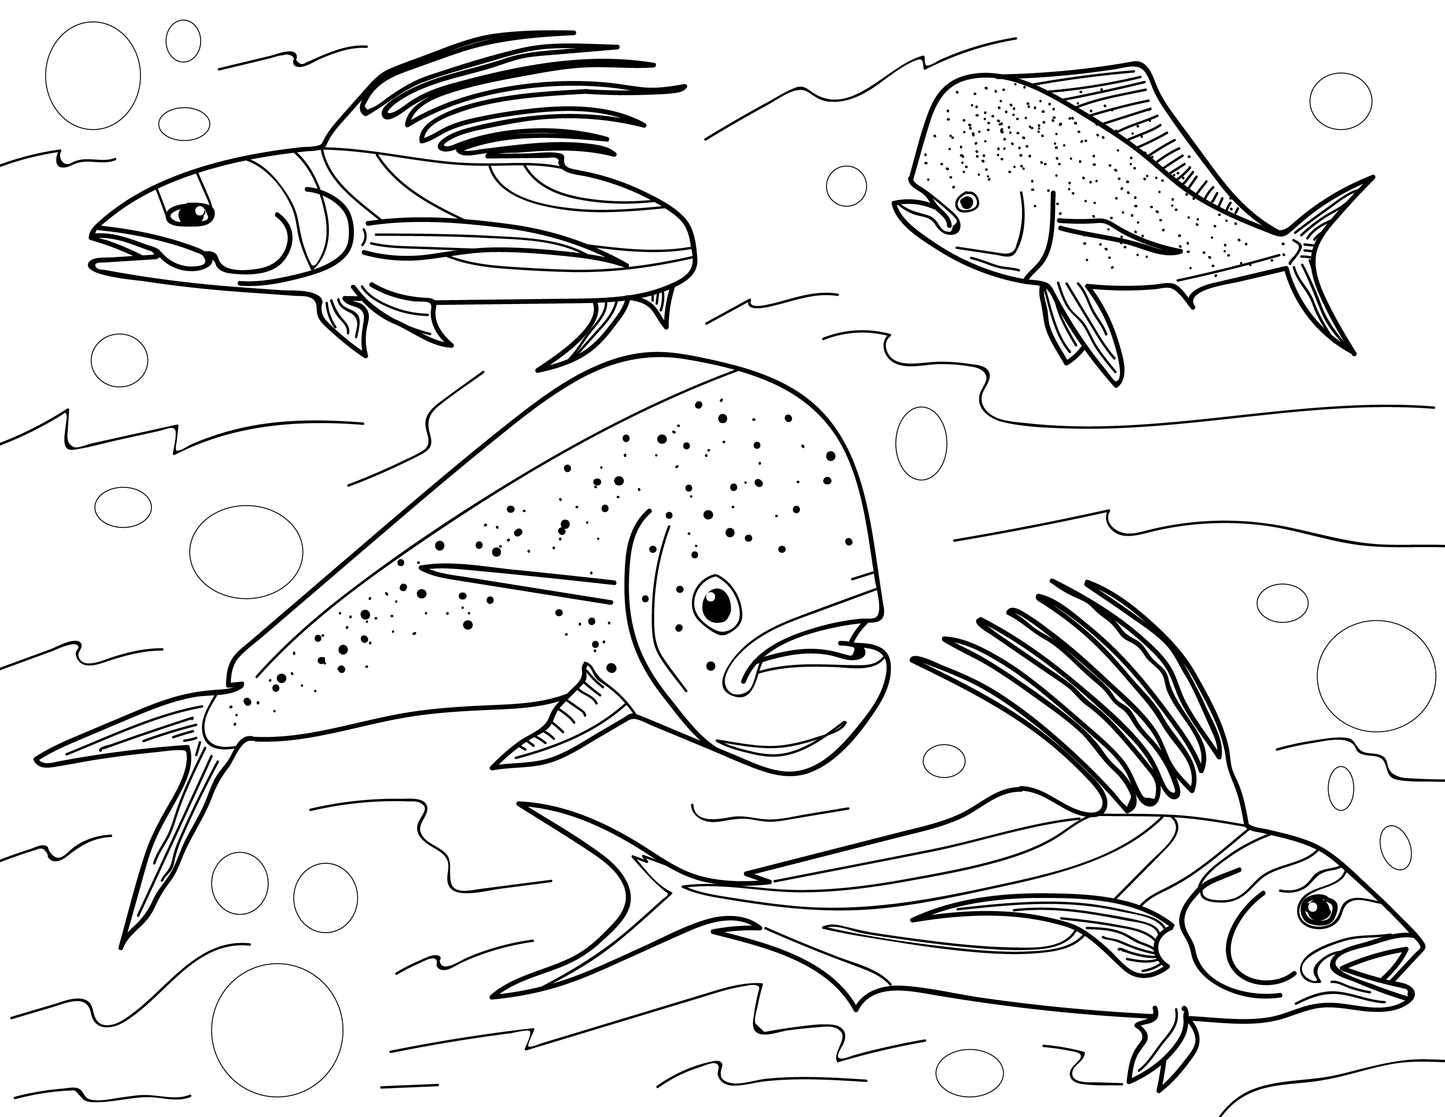 Fish of the Pacific Educational Coloring Book